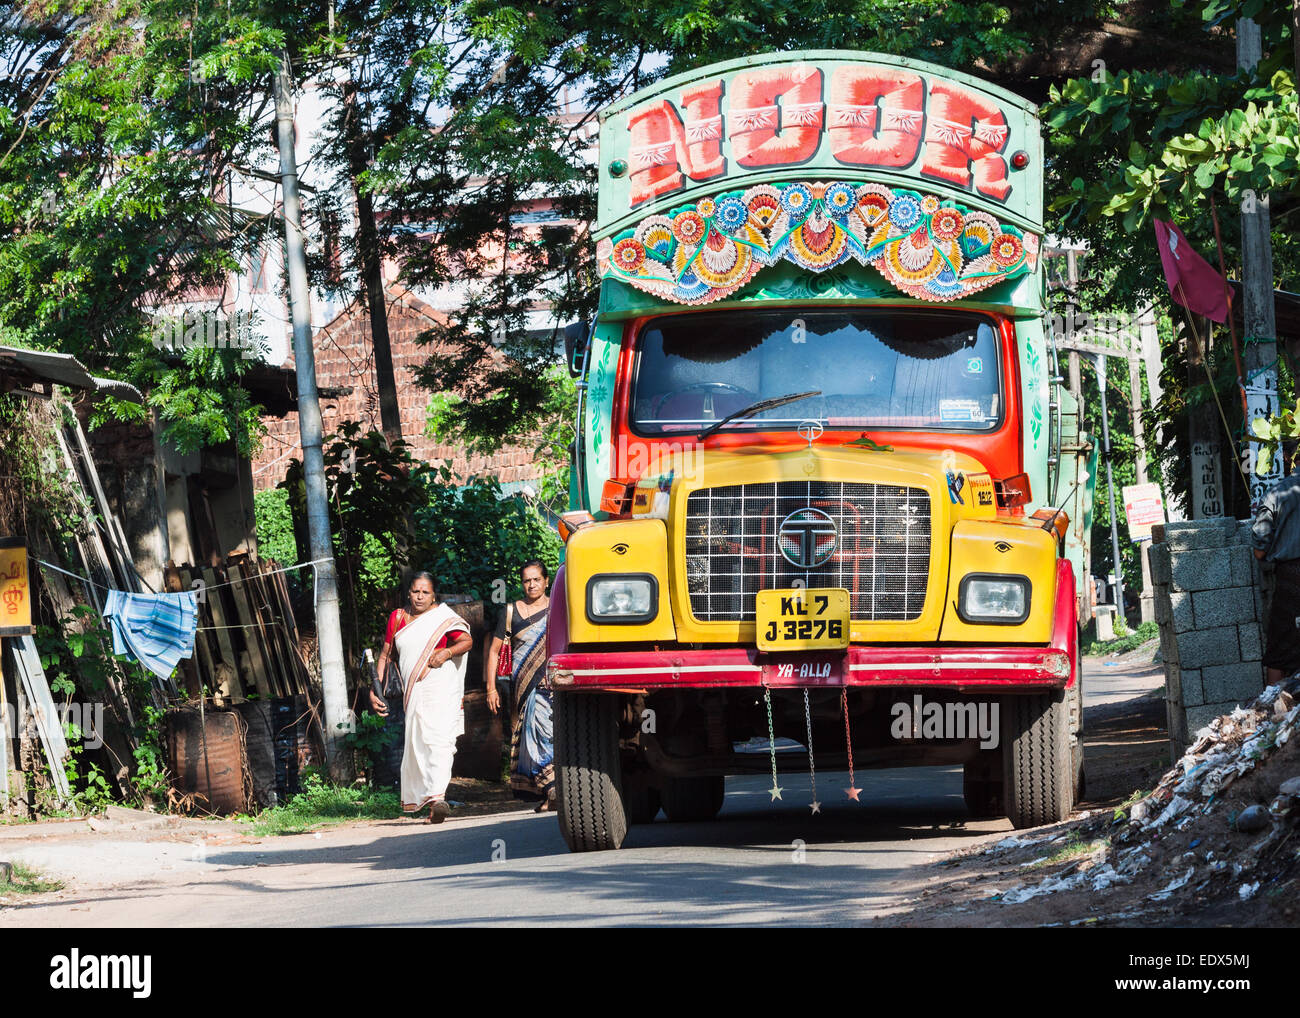 Colorful decorated Tata truck in Alappuzha, Kerala state of southern India. Stock Photo